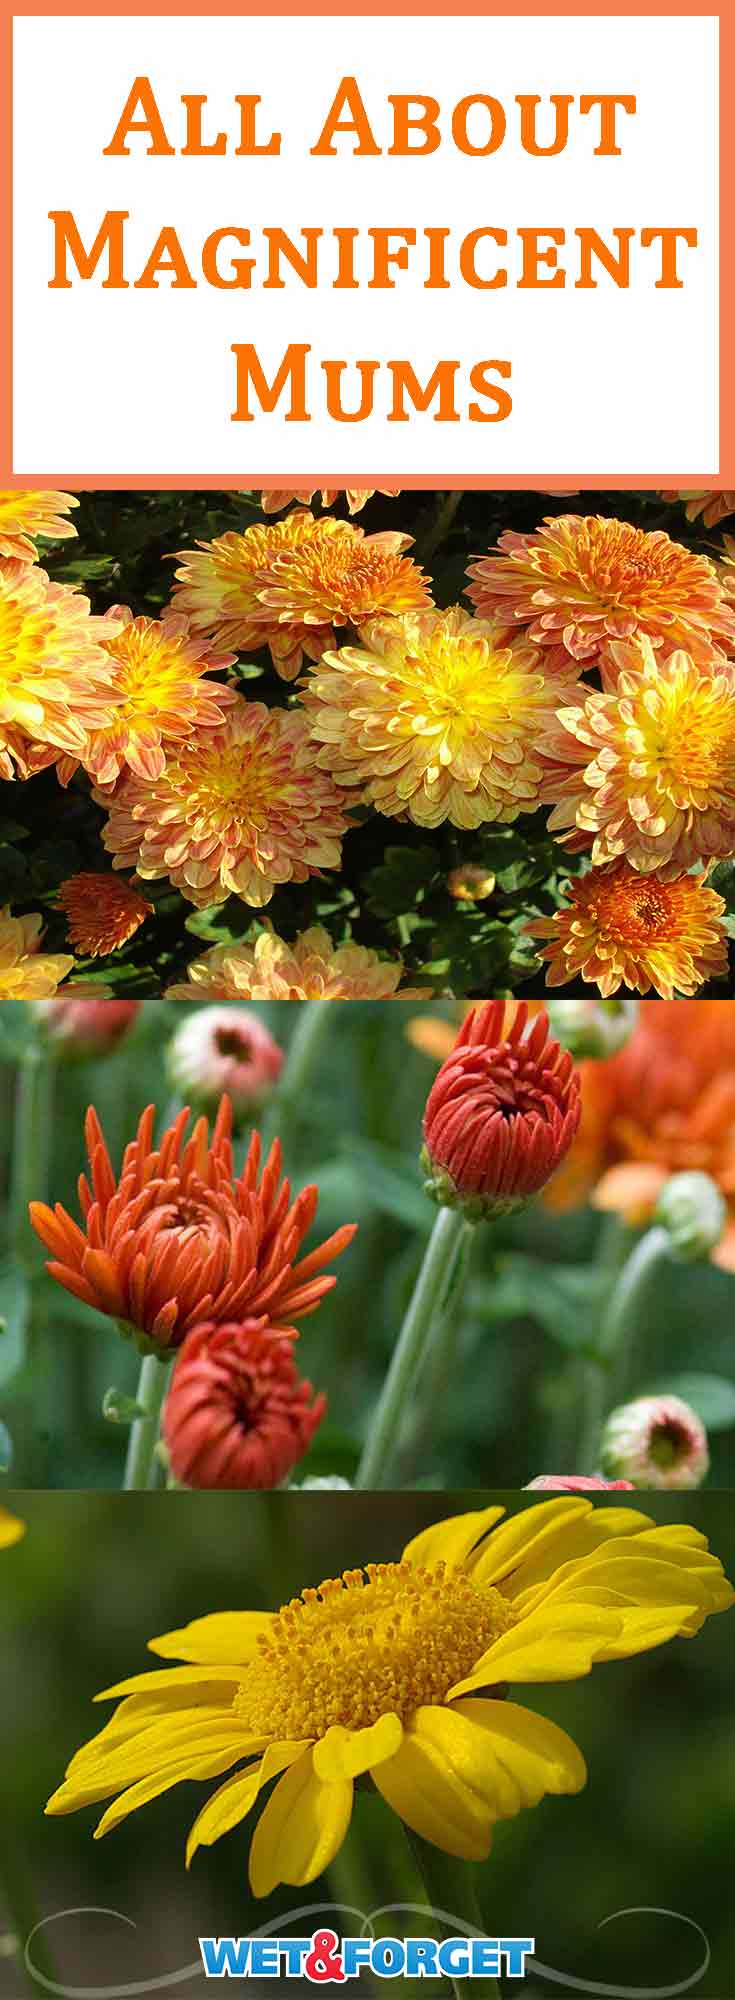 Falls favorite flower, mums, spring to life as many other flowers begin to wilt. They come in a few different shapes and a wide variety of colors. Read on for more tips to make the most out of mums this season.